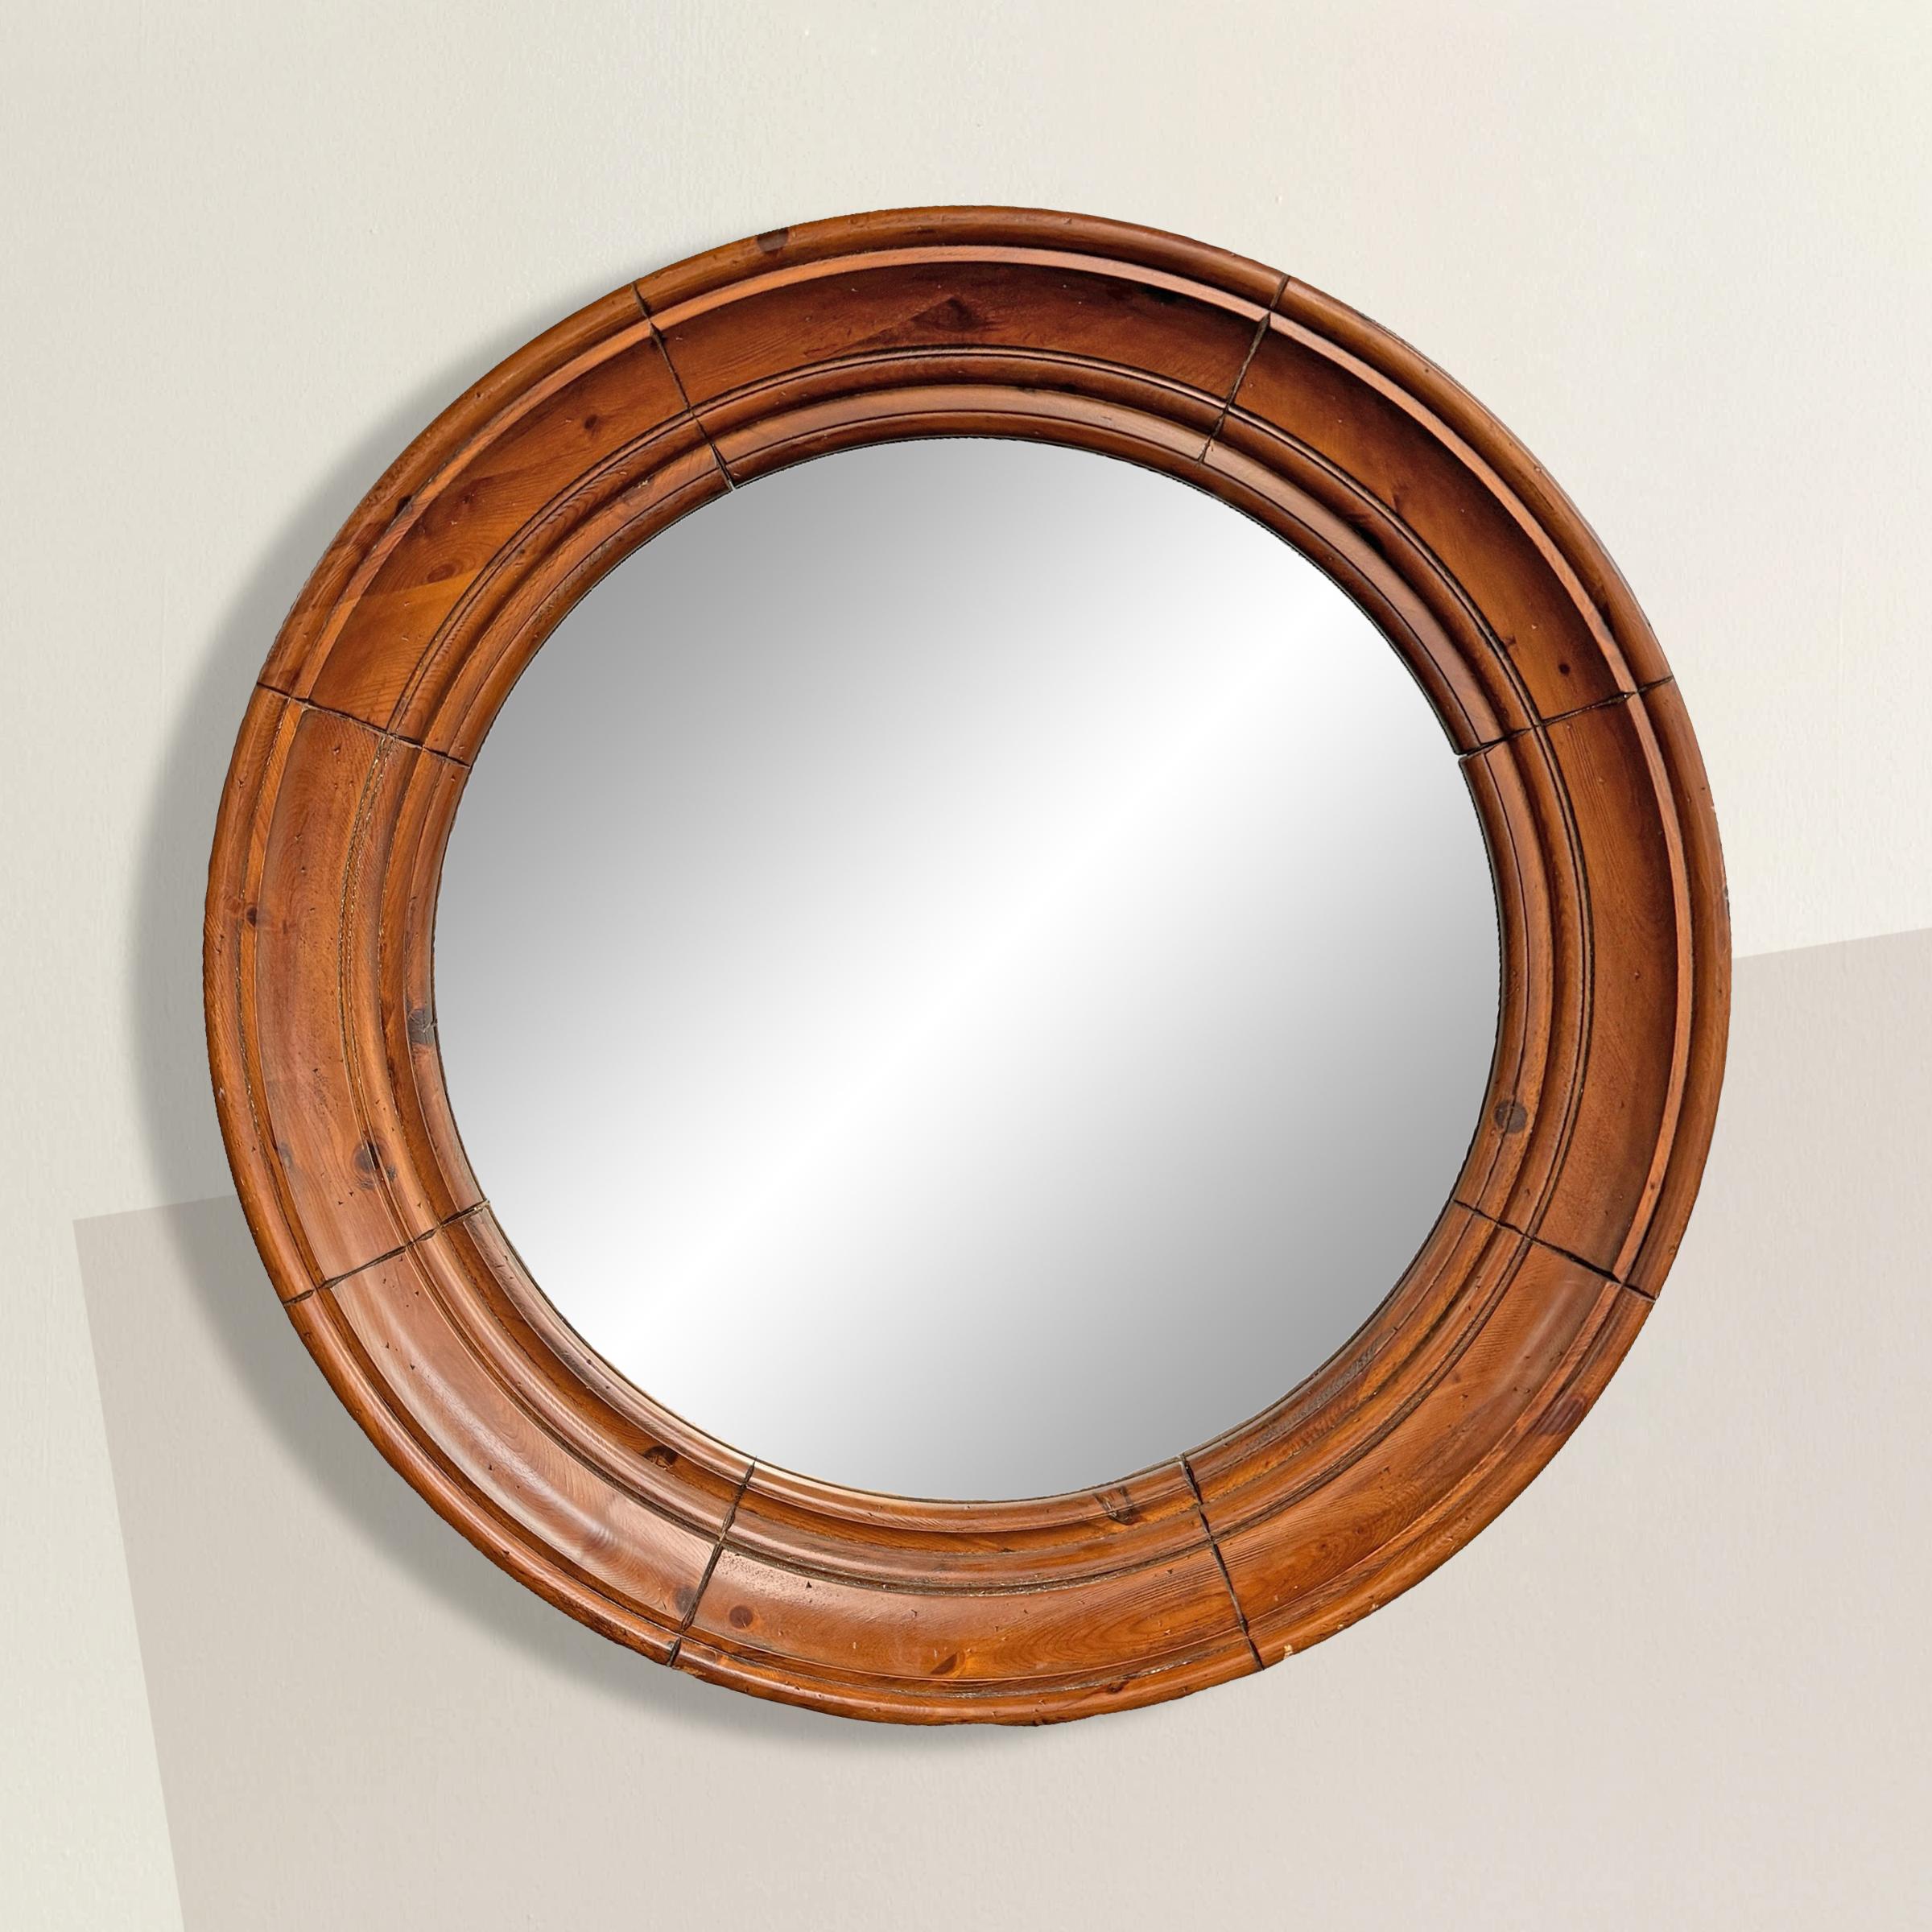 Elevate the ambiance of your living space with this stunning large round pine framed mirror, boasting a deep profile for a bold statement. Crafted with meticulous attention to detail, its generous size is perfectly scaled to command attention over a